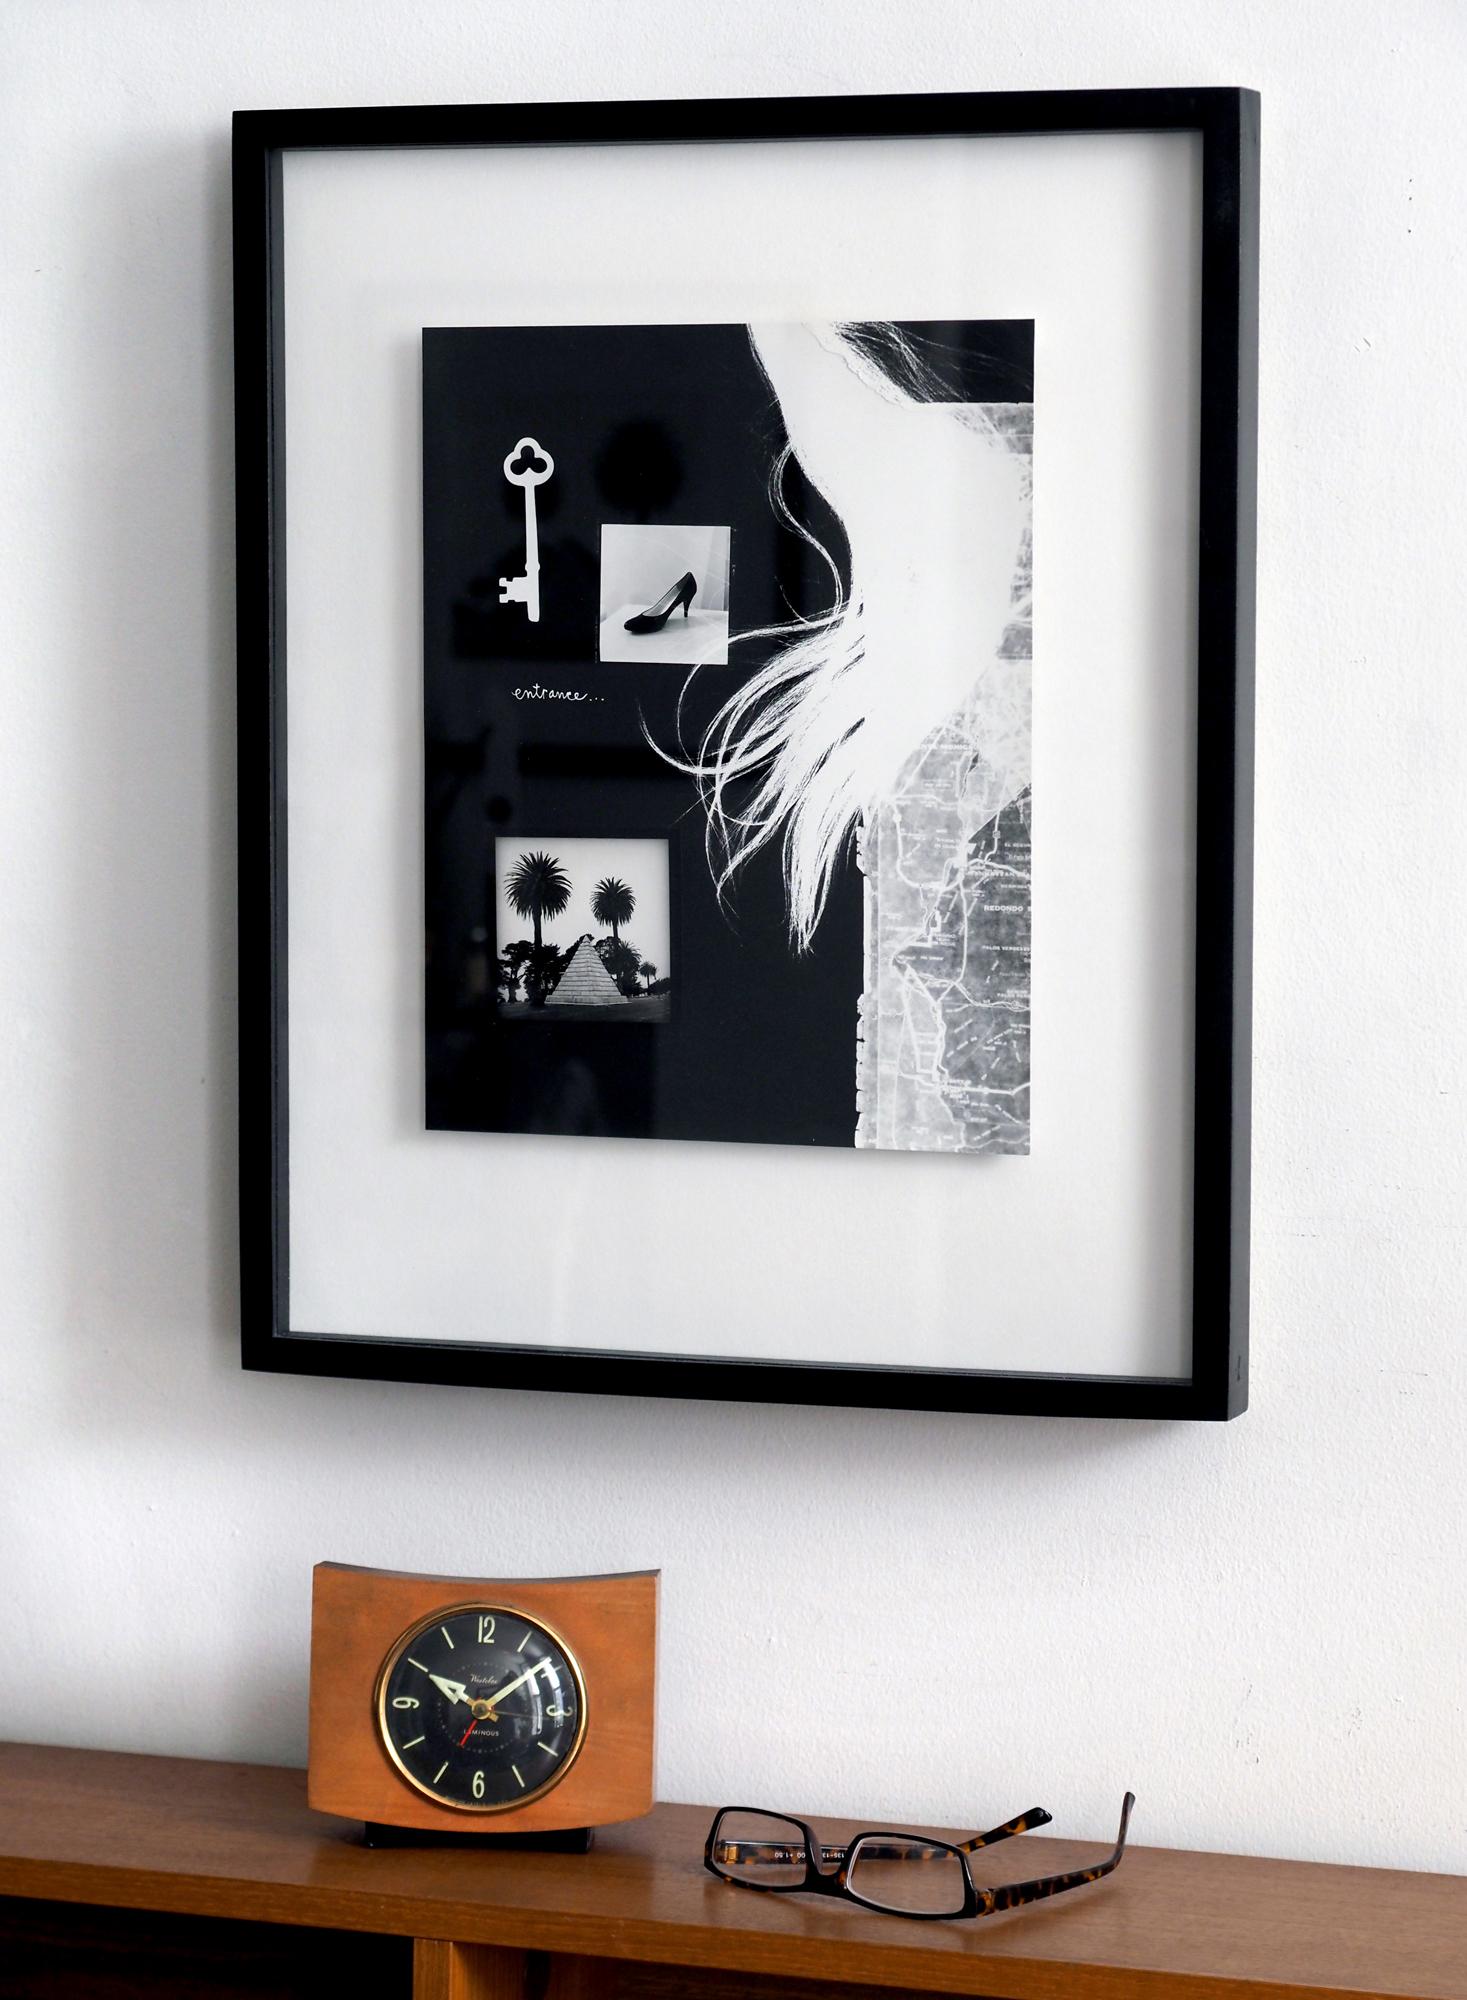 Entrance: framed abstract black & white photograph collage w/ key, shoe, trees - Abstract Photograph by Jenny Lynn